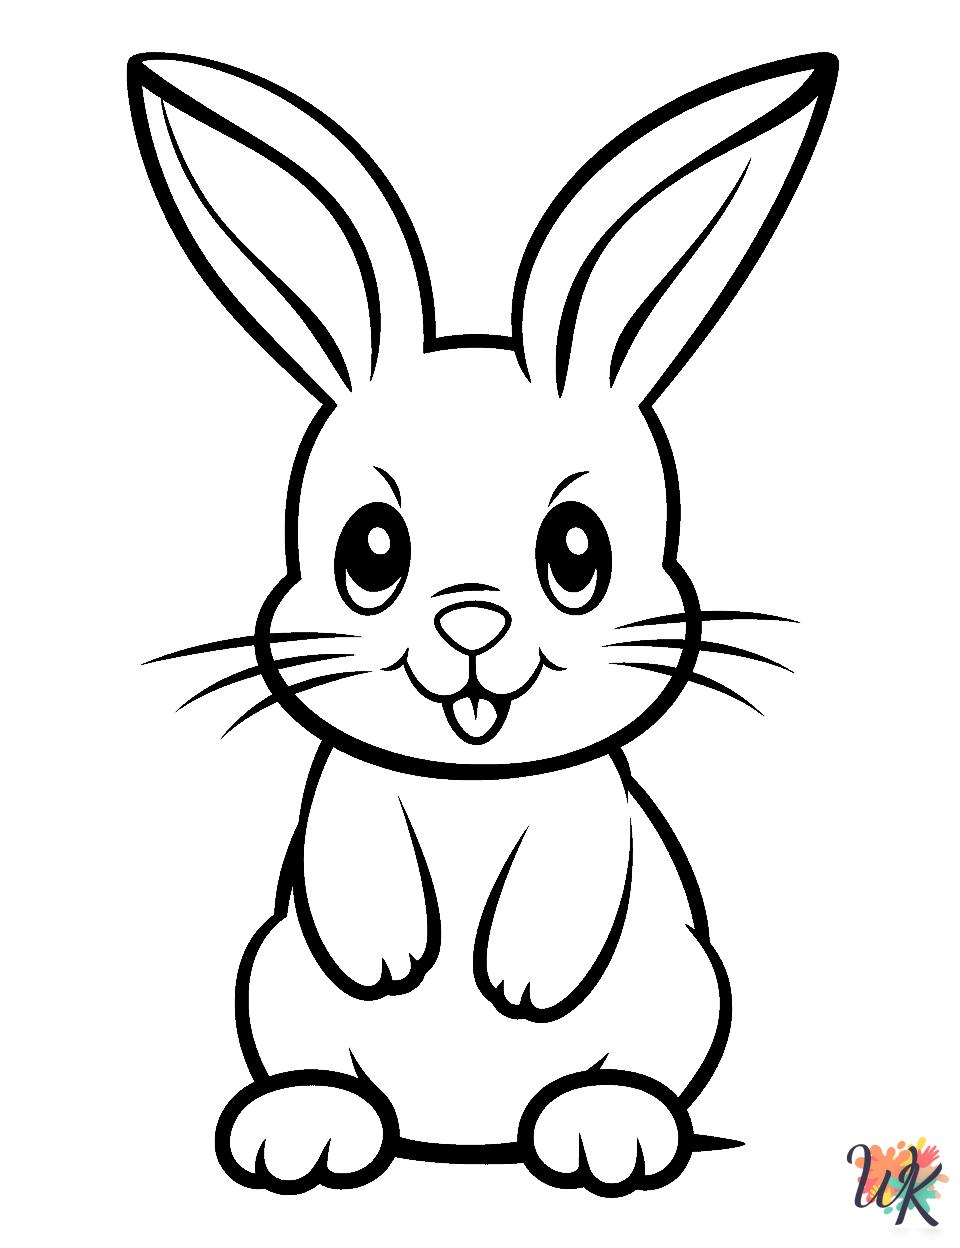 Rabbits coloring book pages